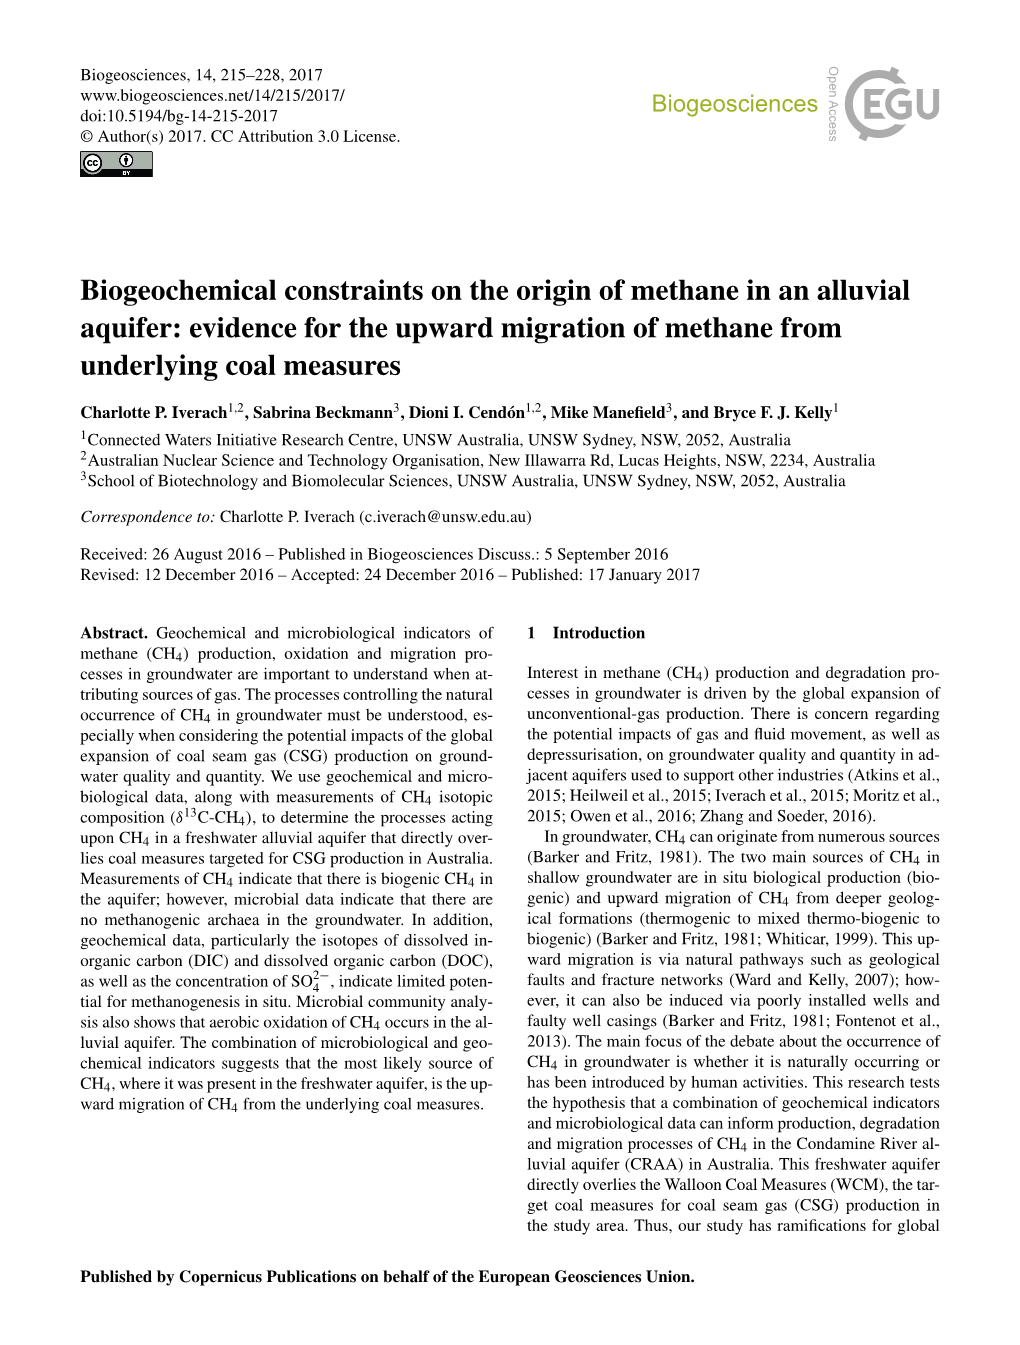 Biogeochemical Constraints on the Origin of Methane in an Alluvial Aquifer: Evidence for the Upward Migration of Methane from Underlying Coal Measures